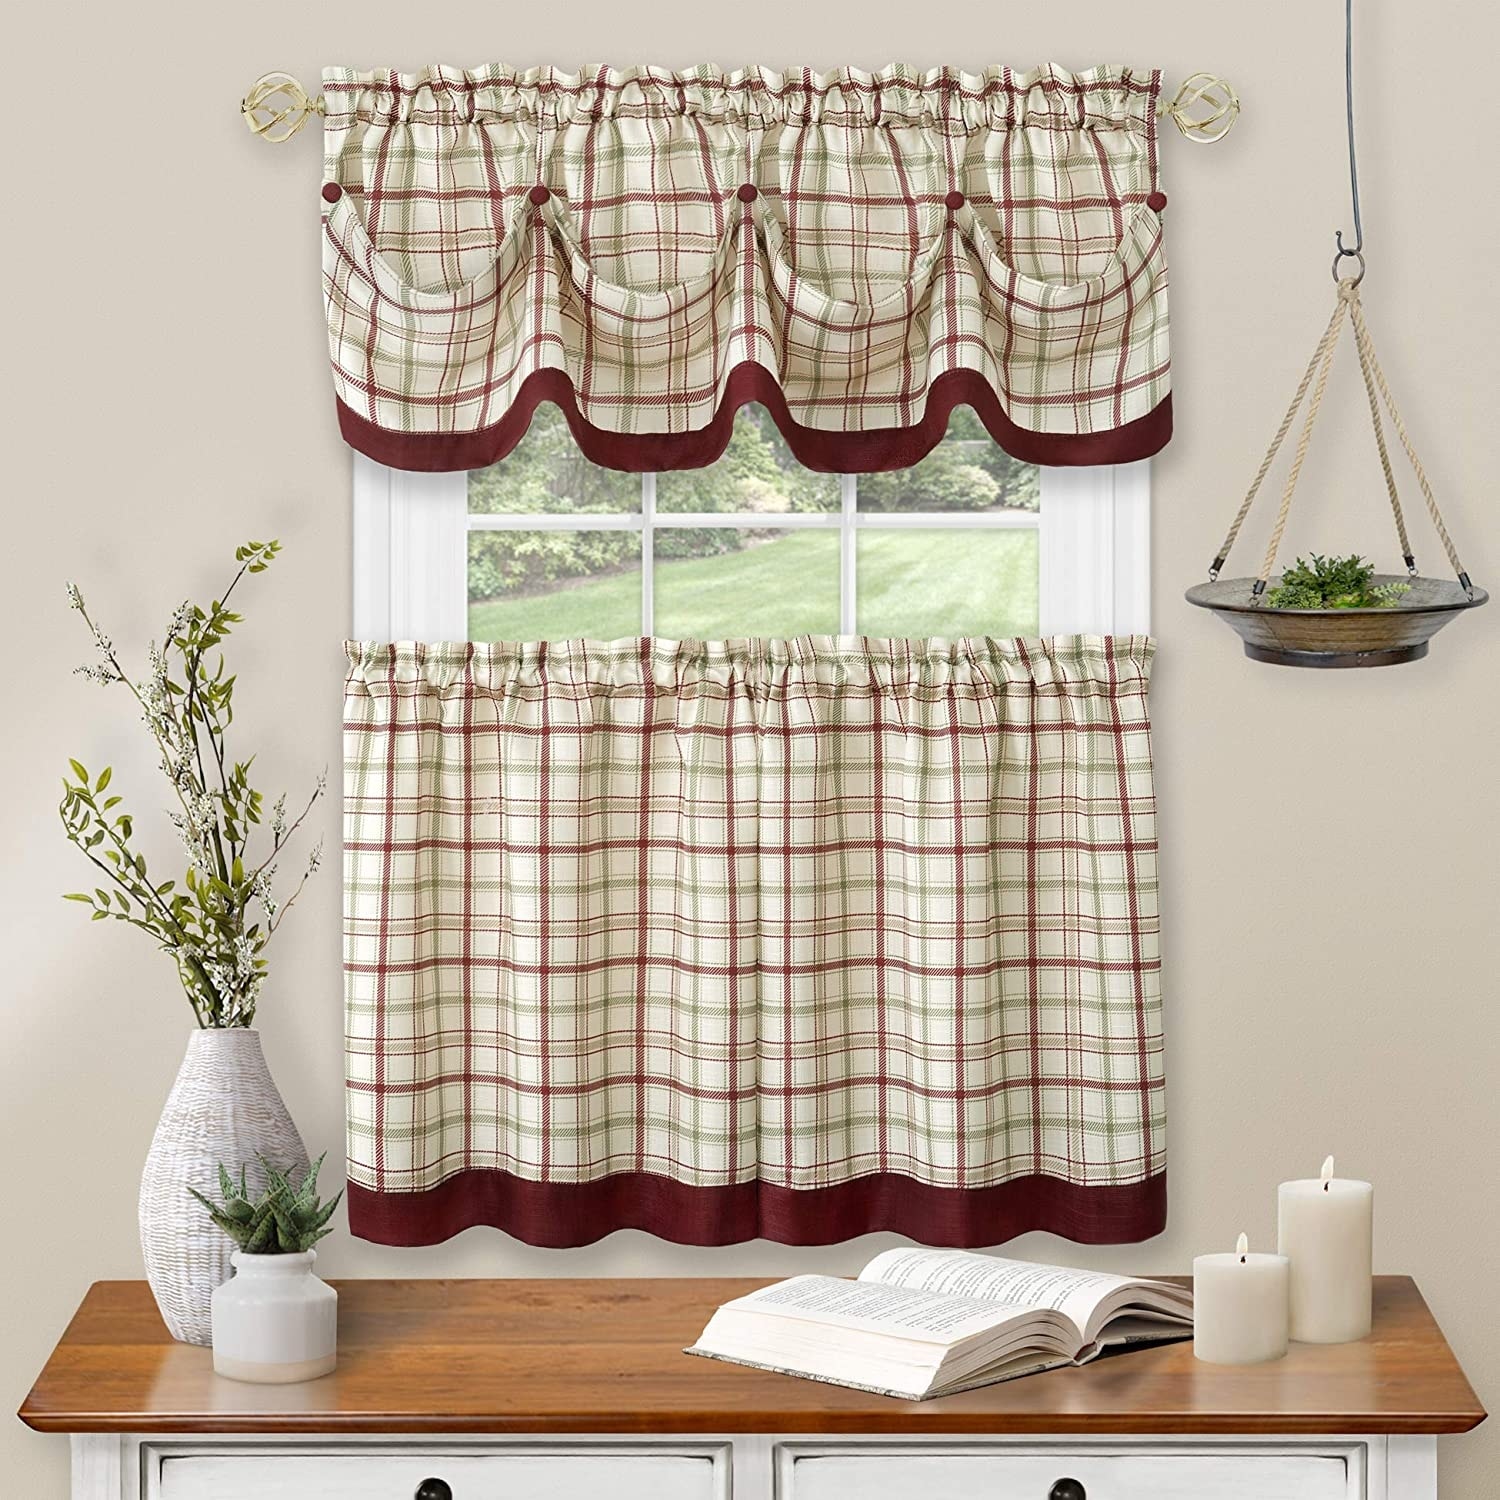 Tattersall Window Kitchen Curtain Tier And Valance Set Tier 58x36 Inches Valance 58x14 Inches Overstock 31493296